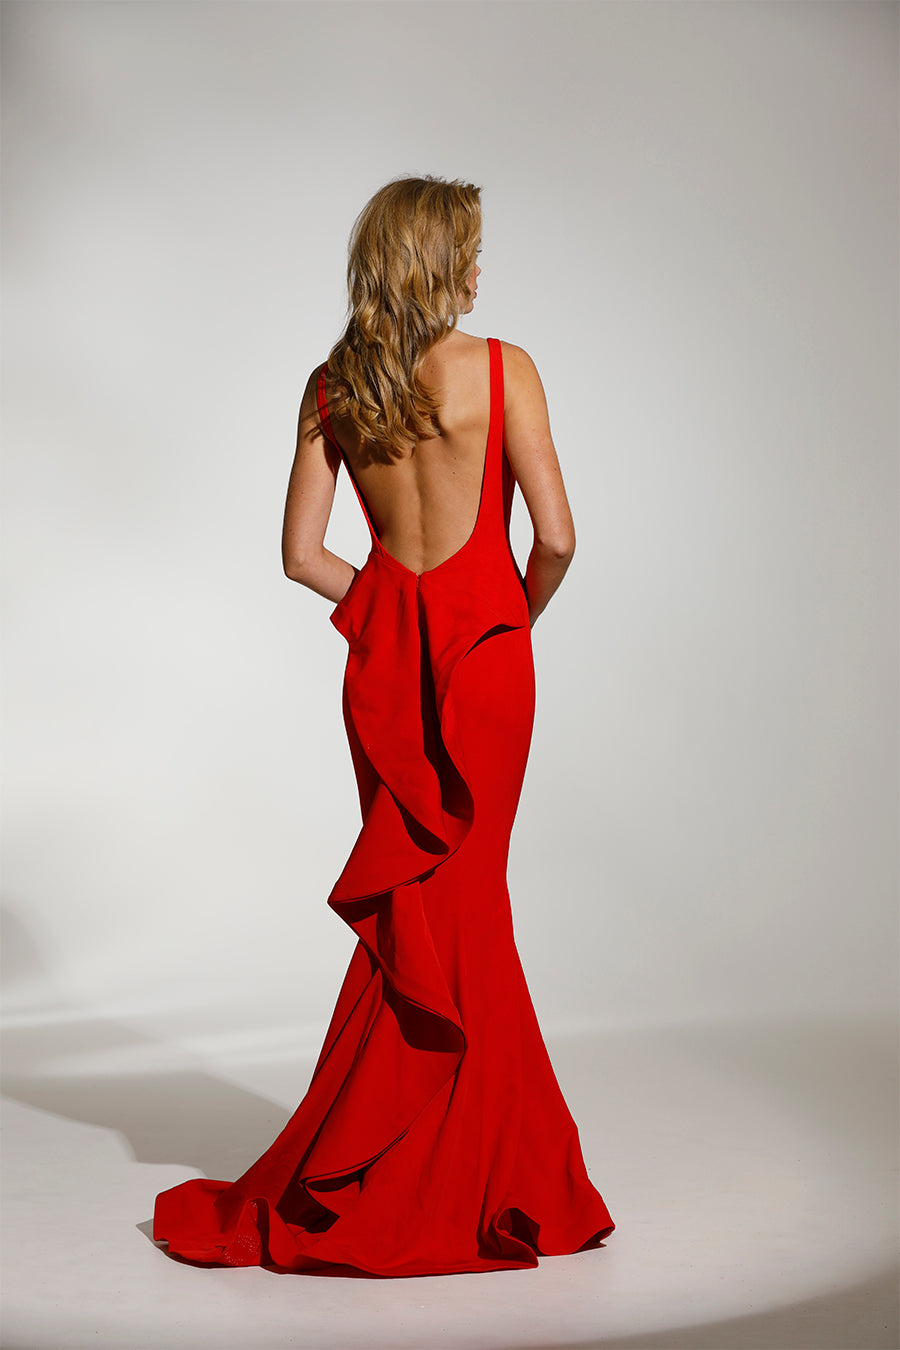 Tinaholy Couture T1708 Chili Red Deep V Neckline w a Drape Back Formal Gown Dress Tina Holly Couture$ AfterPay Humm ZipPay LayBuy Sezzle